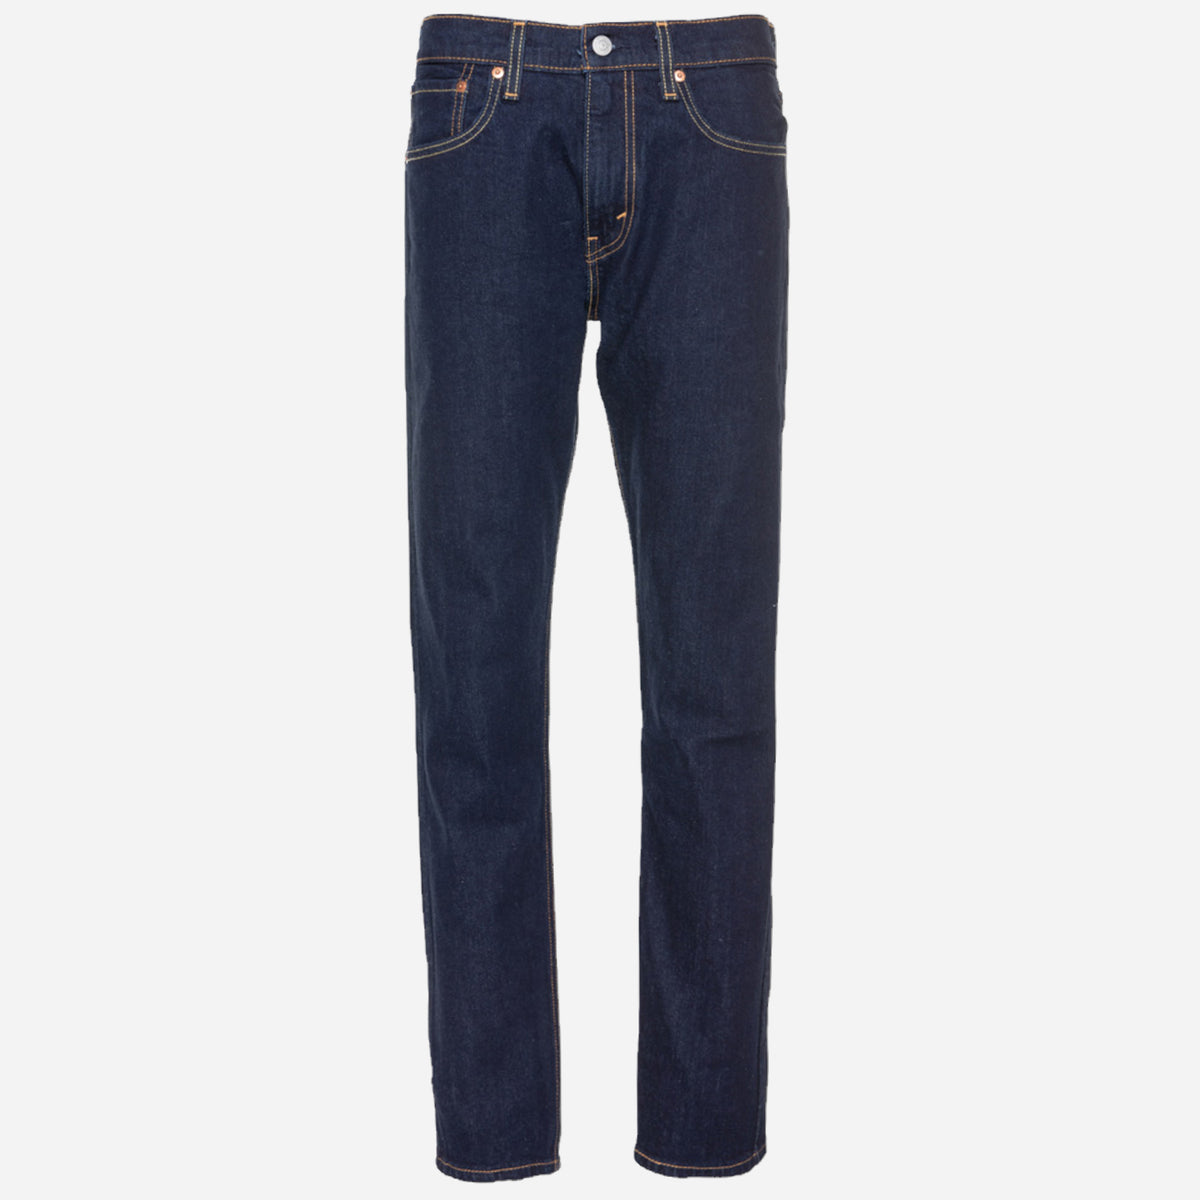 Shop for Levis slim taper fit jeans Online | The SM Store